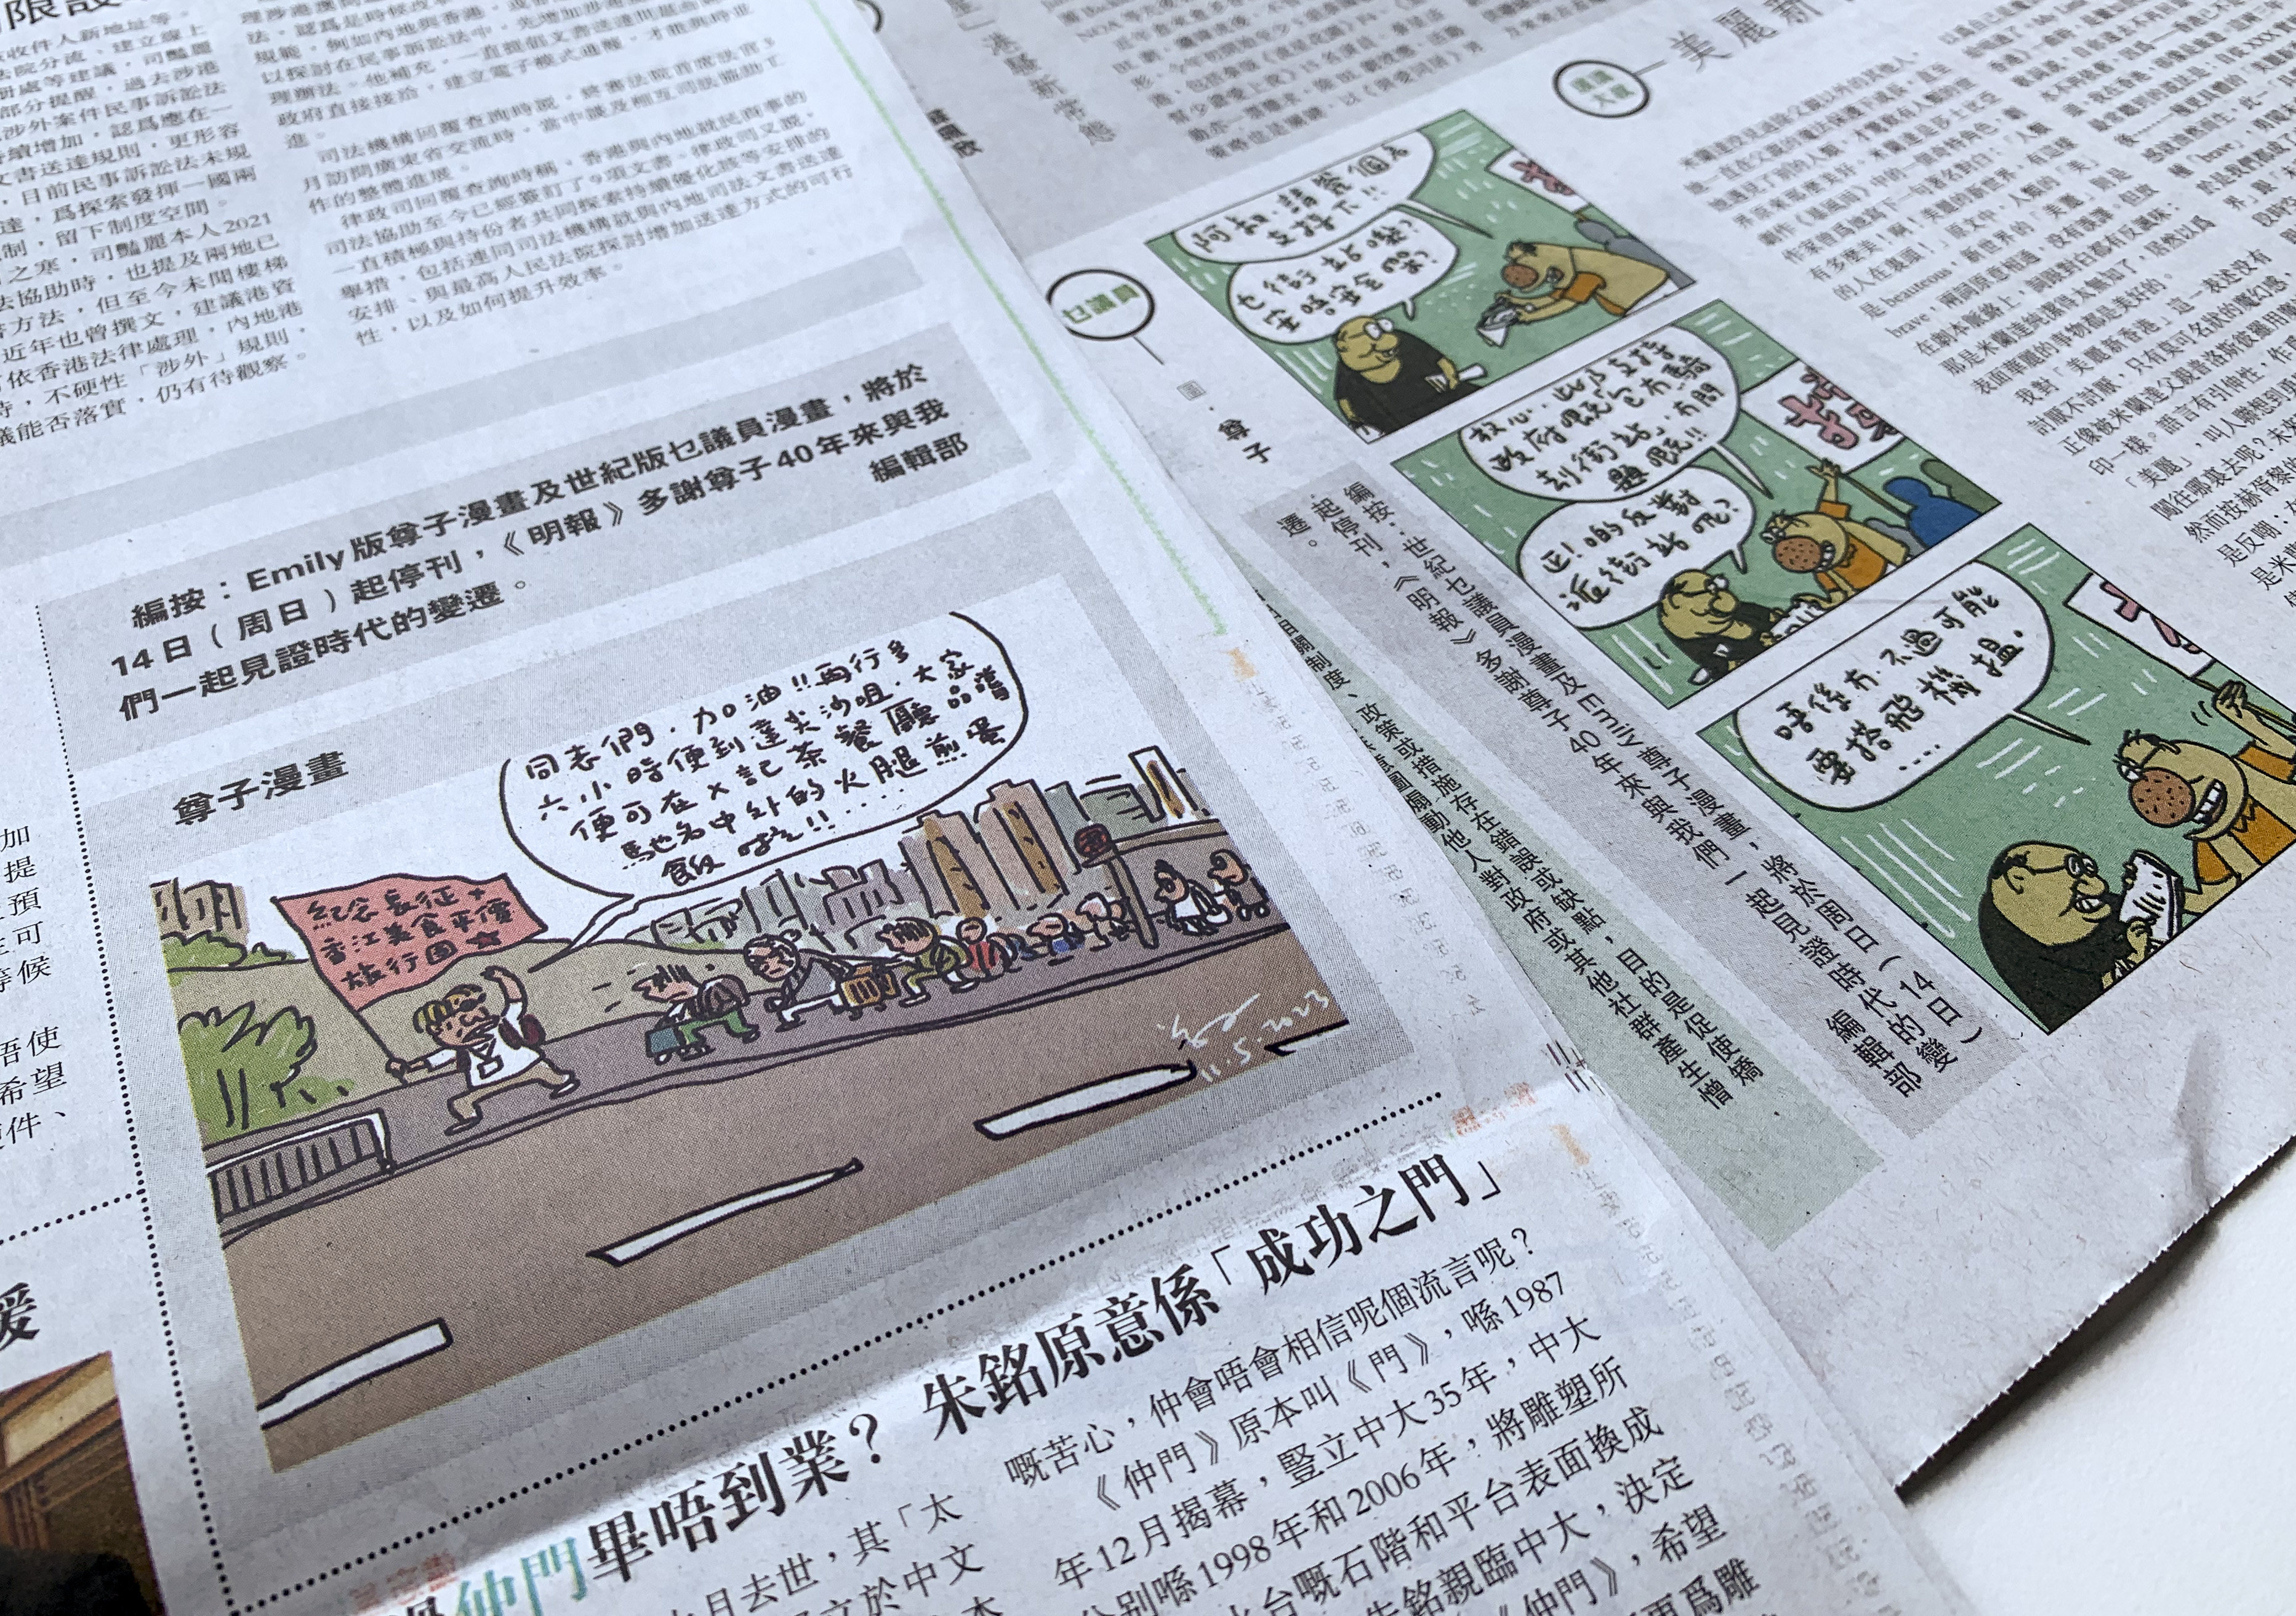 Ming Pao will pull two illustration series by artist Zunzi from Sunday. Photo: SCMP